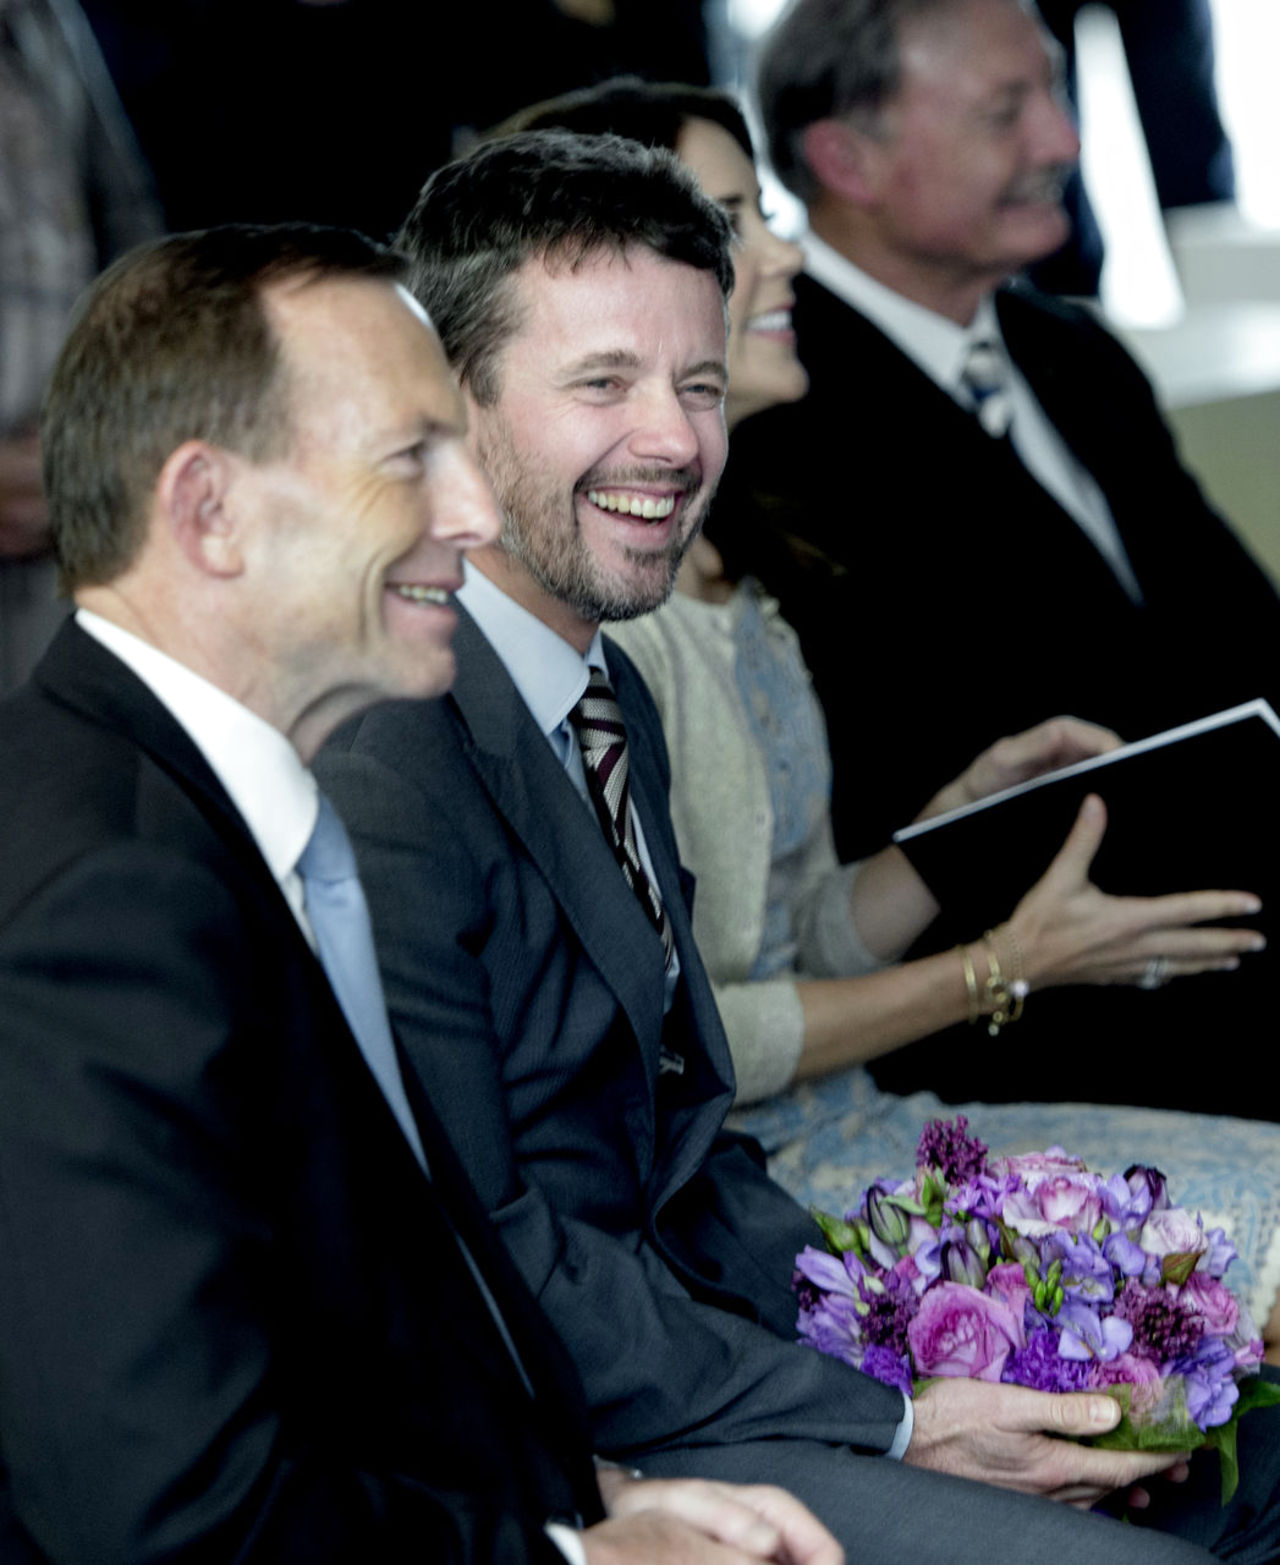 Crown Prince Frederik & Princess Mary's Visit to Australia: 24-28, 2013 - Page 5 - The Royal Forums